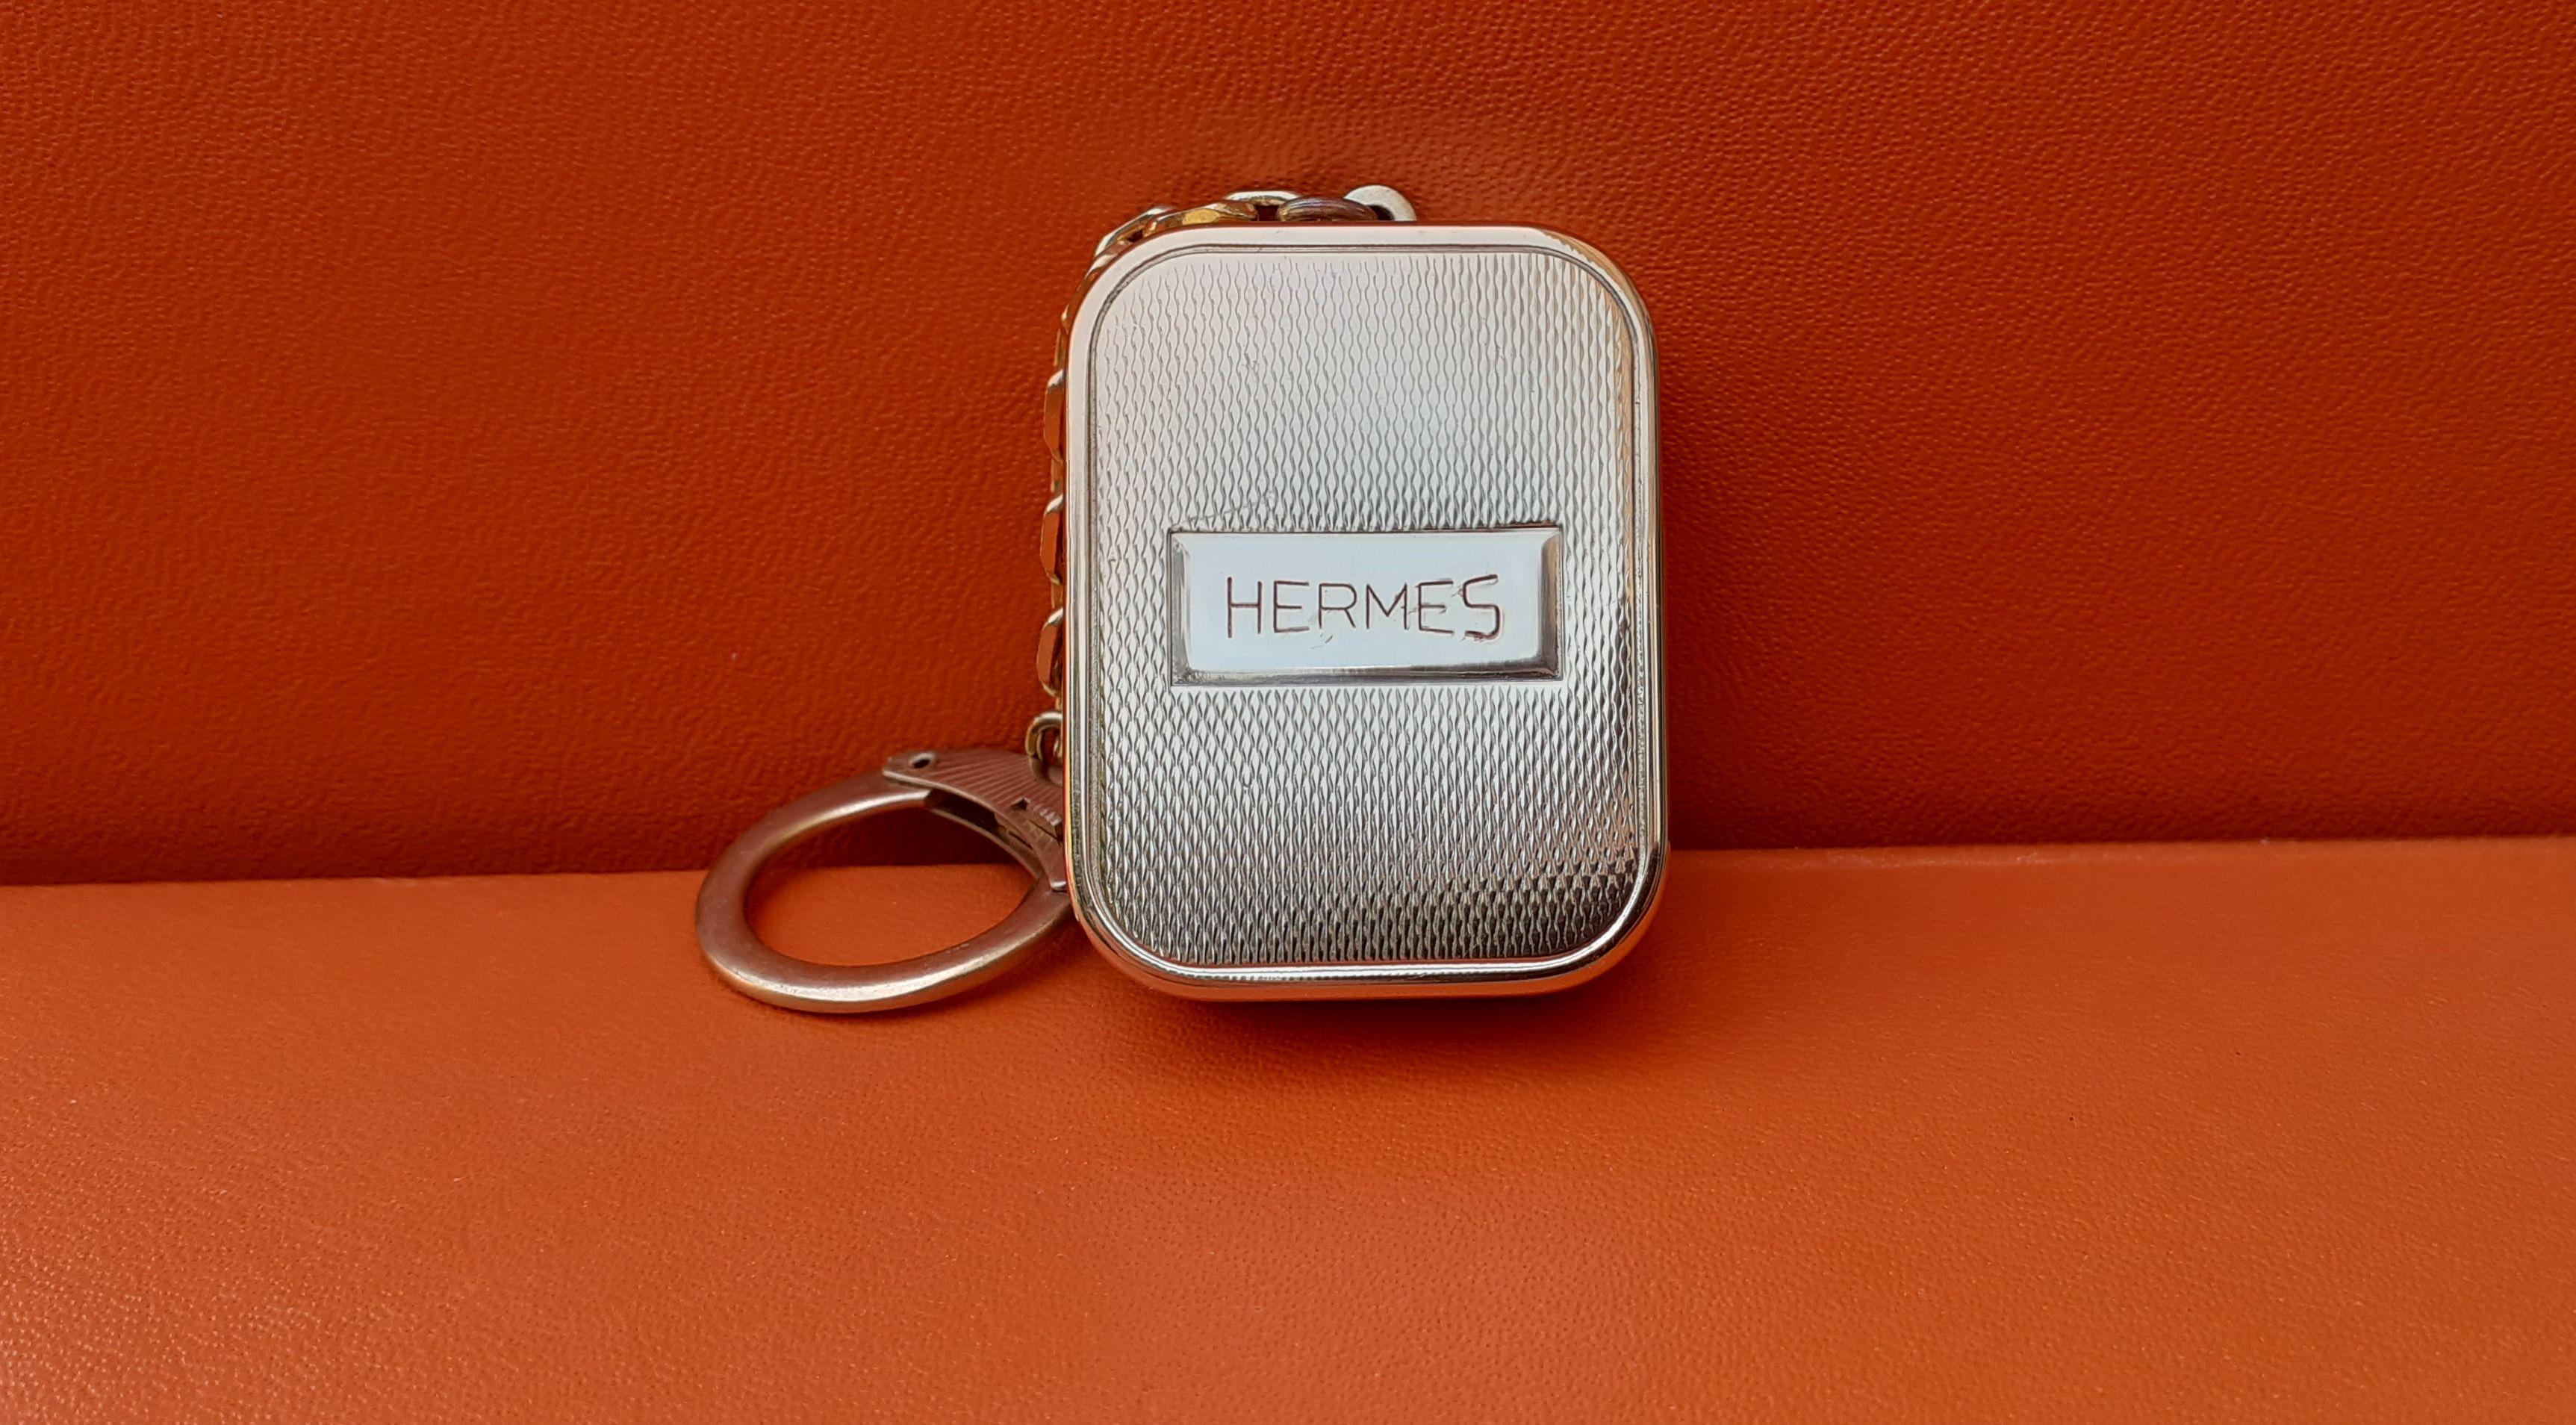 Rare Authentic Reuge Sainte Croix for Hermès Music box

With keychain

Turn the mechanical key (at the back) clockwise and pull up the small button to hear the music 

We do not know the song... Sorry ! Ask if you want to hear it

Made by Reuge